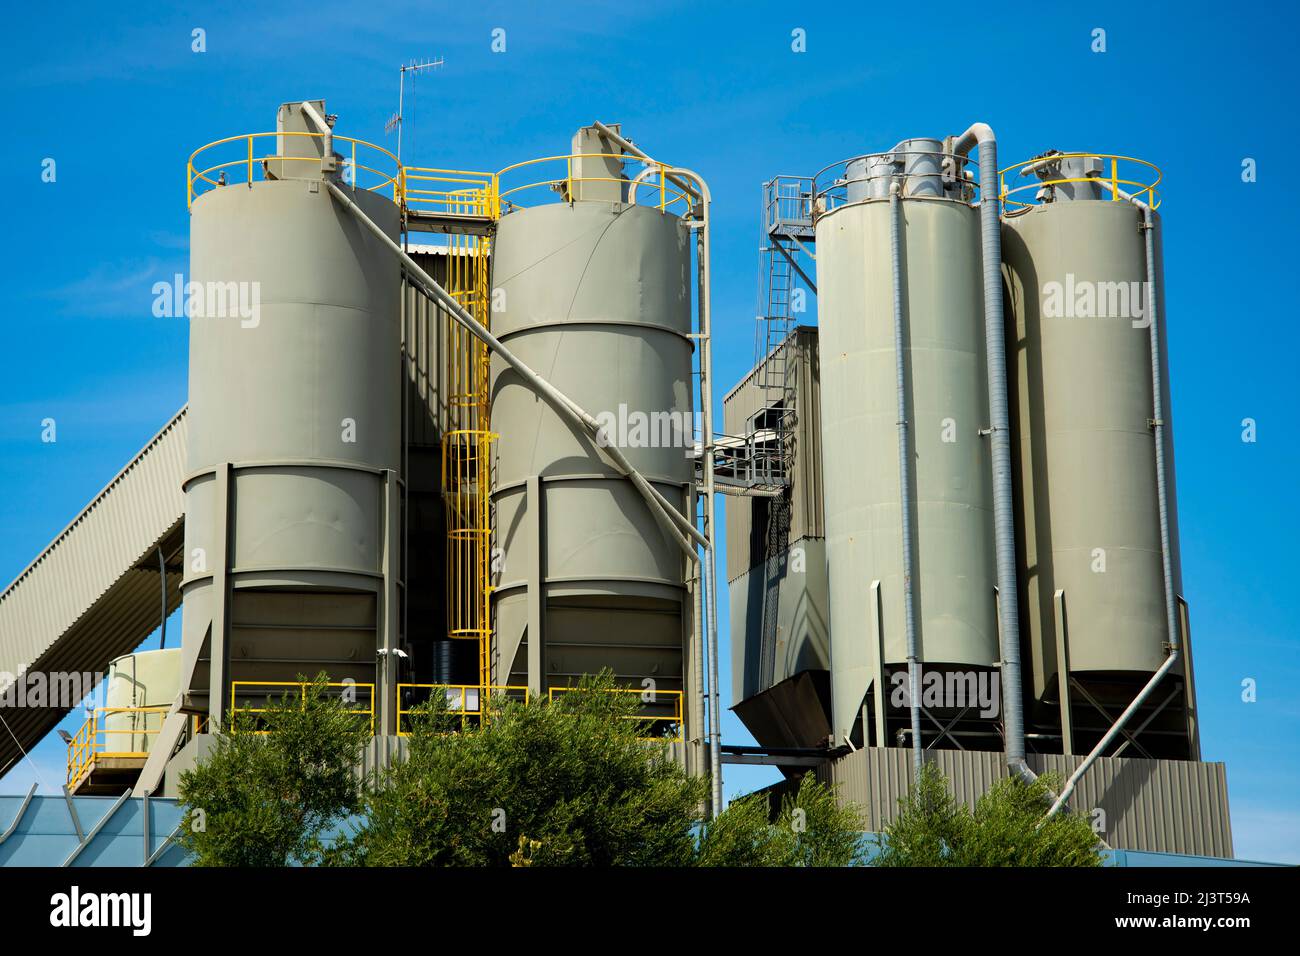 Silos in Industrial Cement Plant Stock Photo